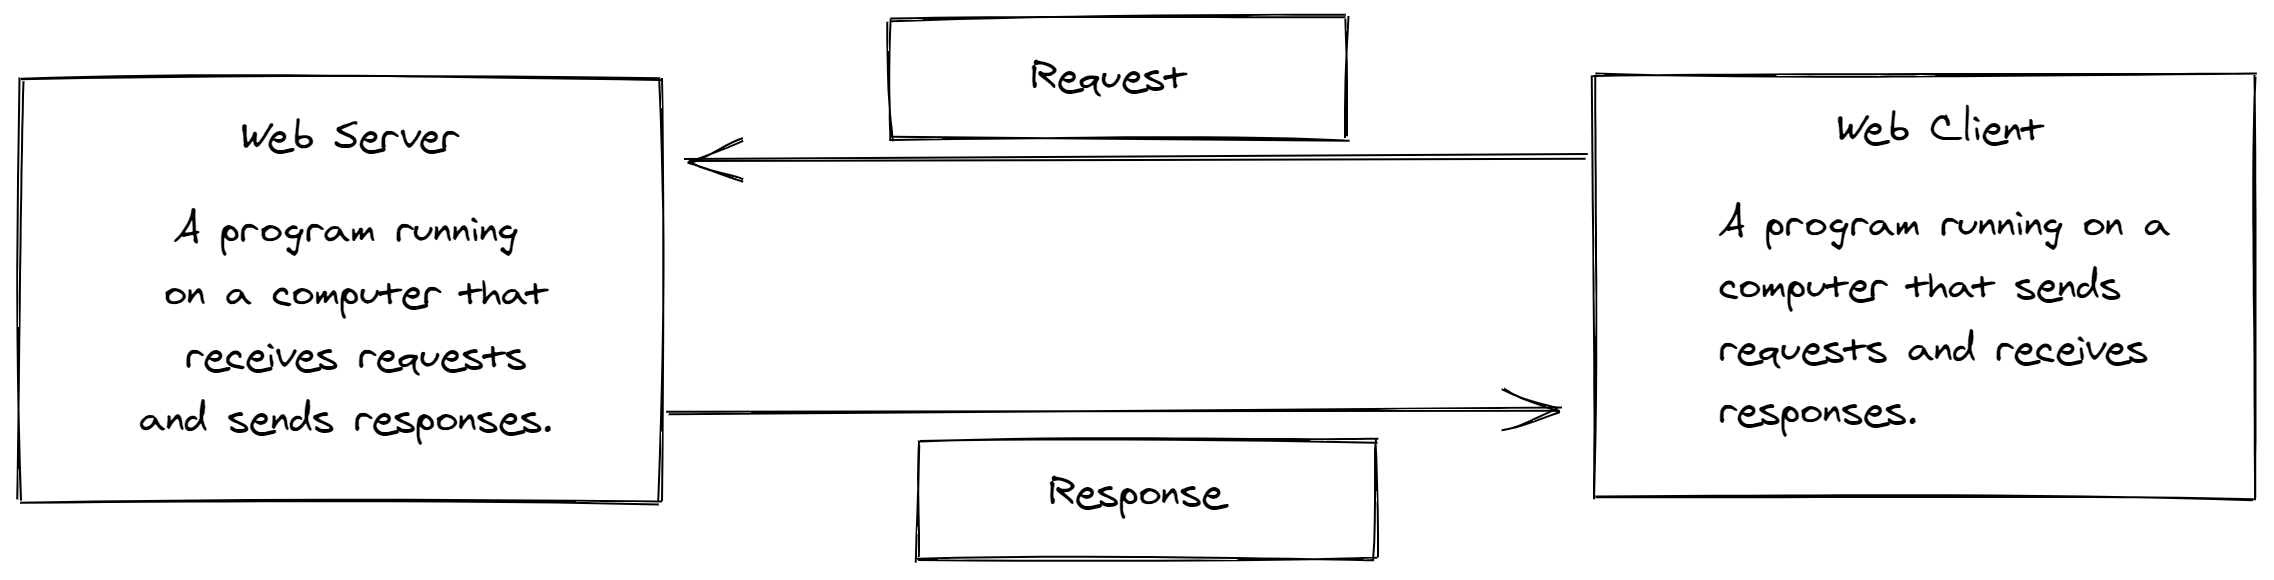 Requests and Responses Chart